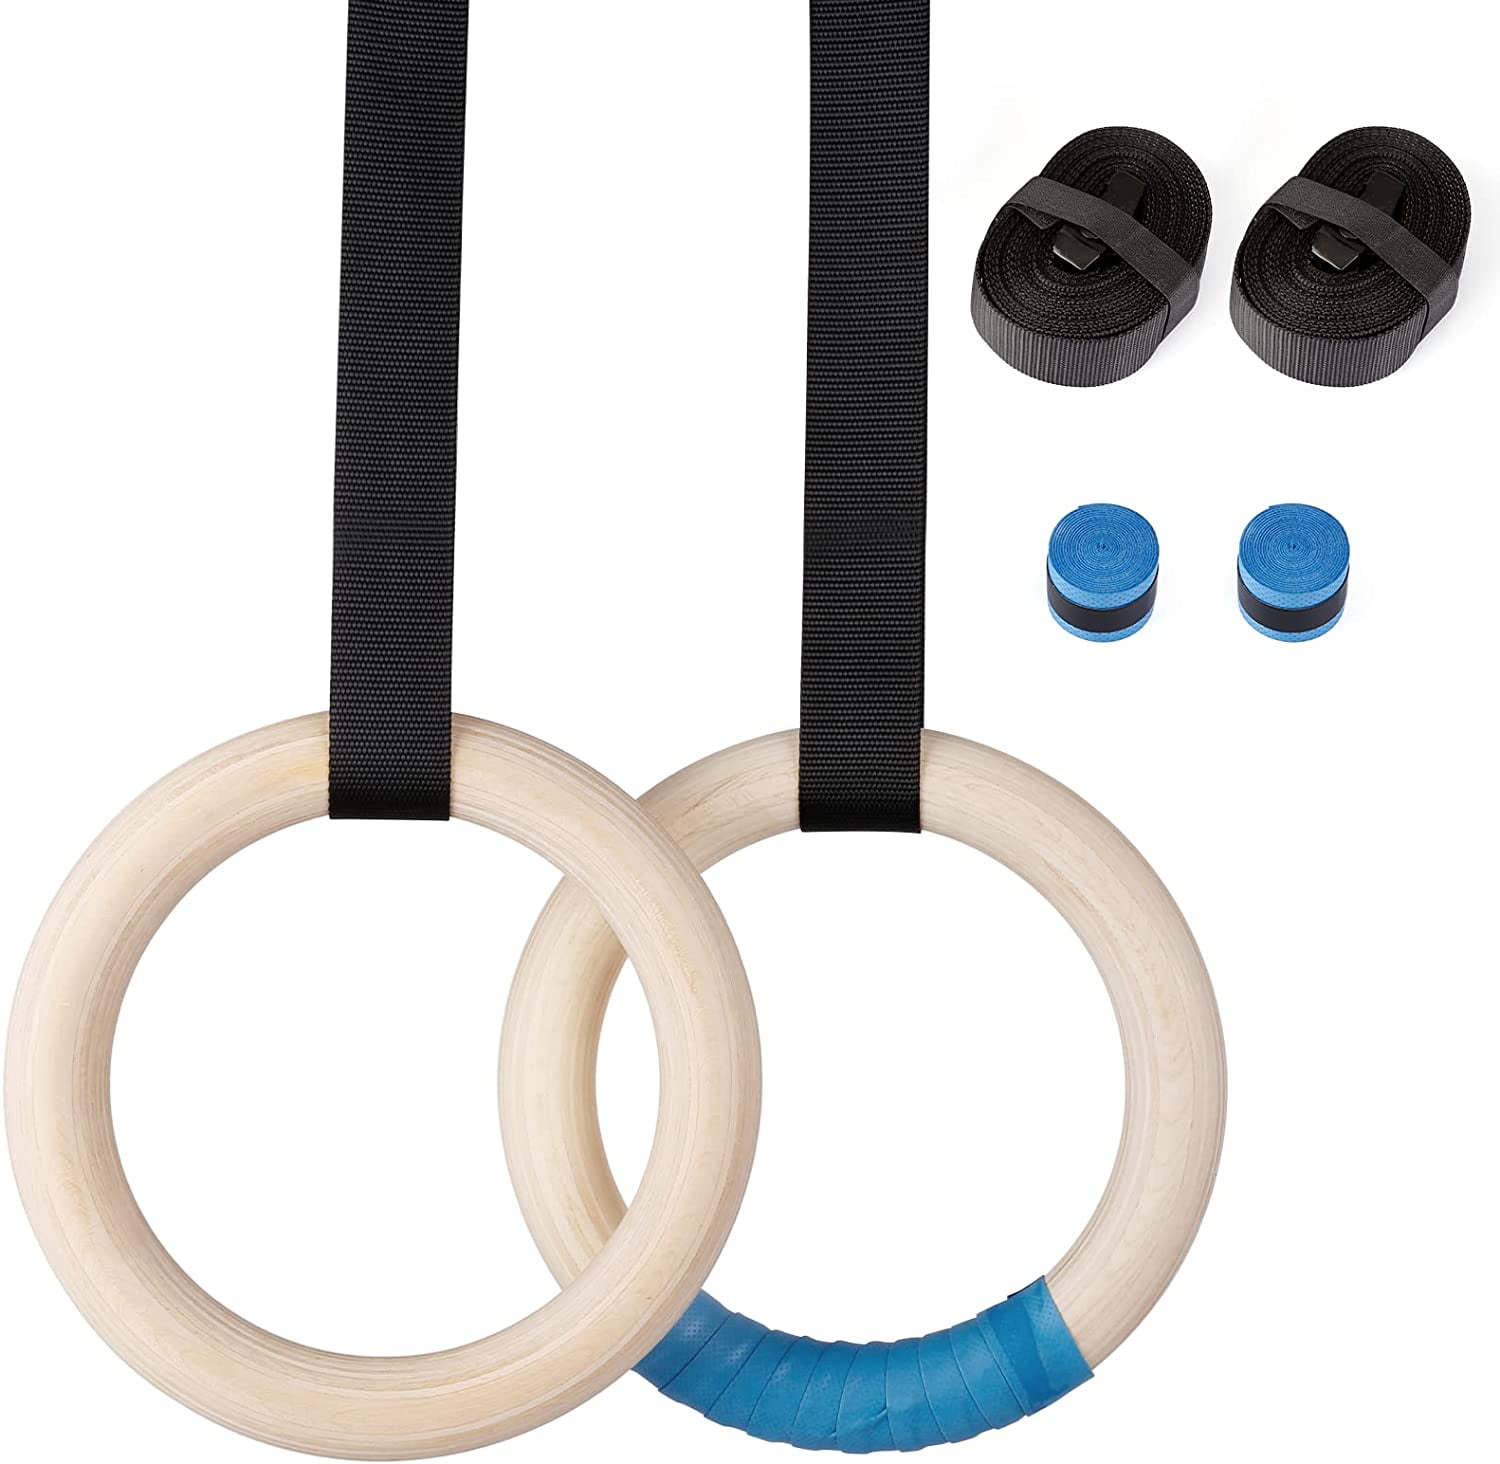 5BILLION Wooden Gymnastic Rings Olympic Gym Rings And Adjustable Straps Set 